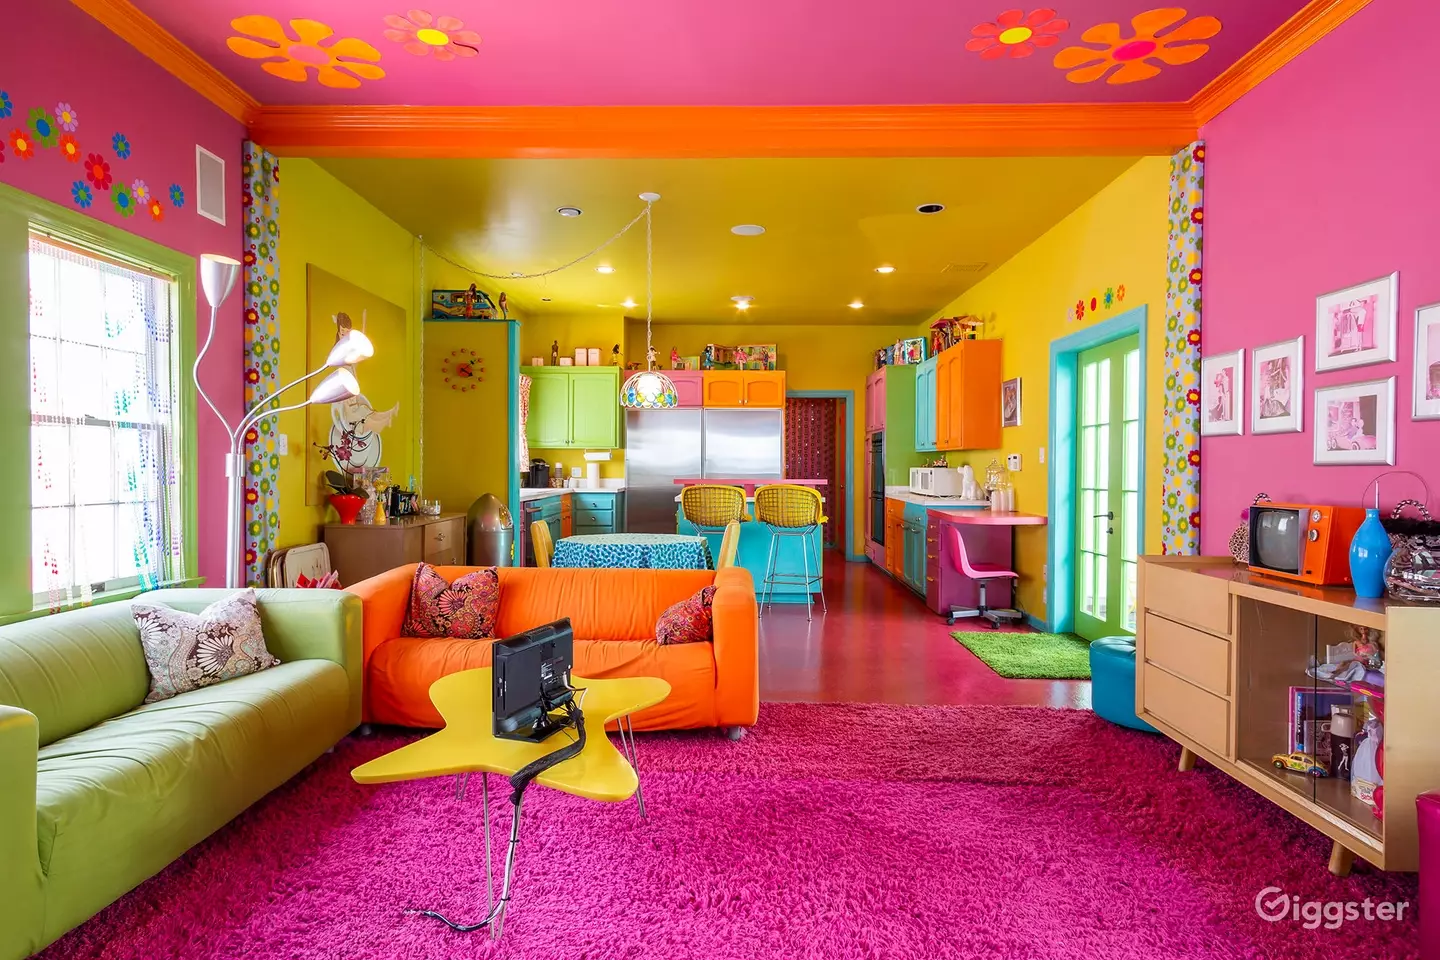 A living room that Barbie would be proud of. (